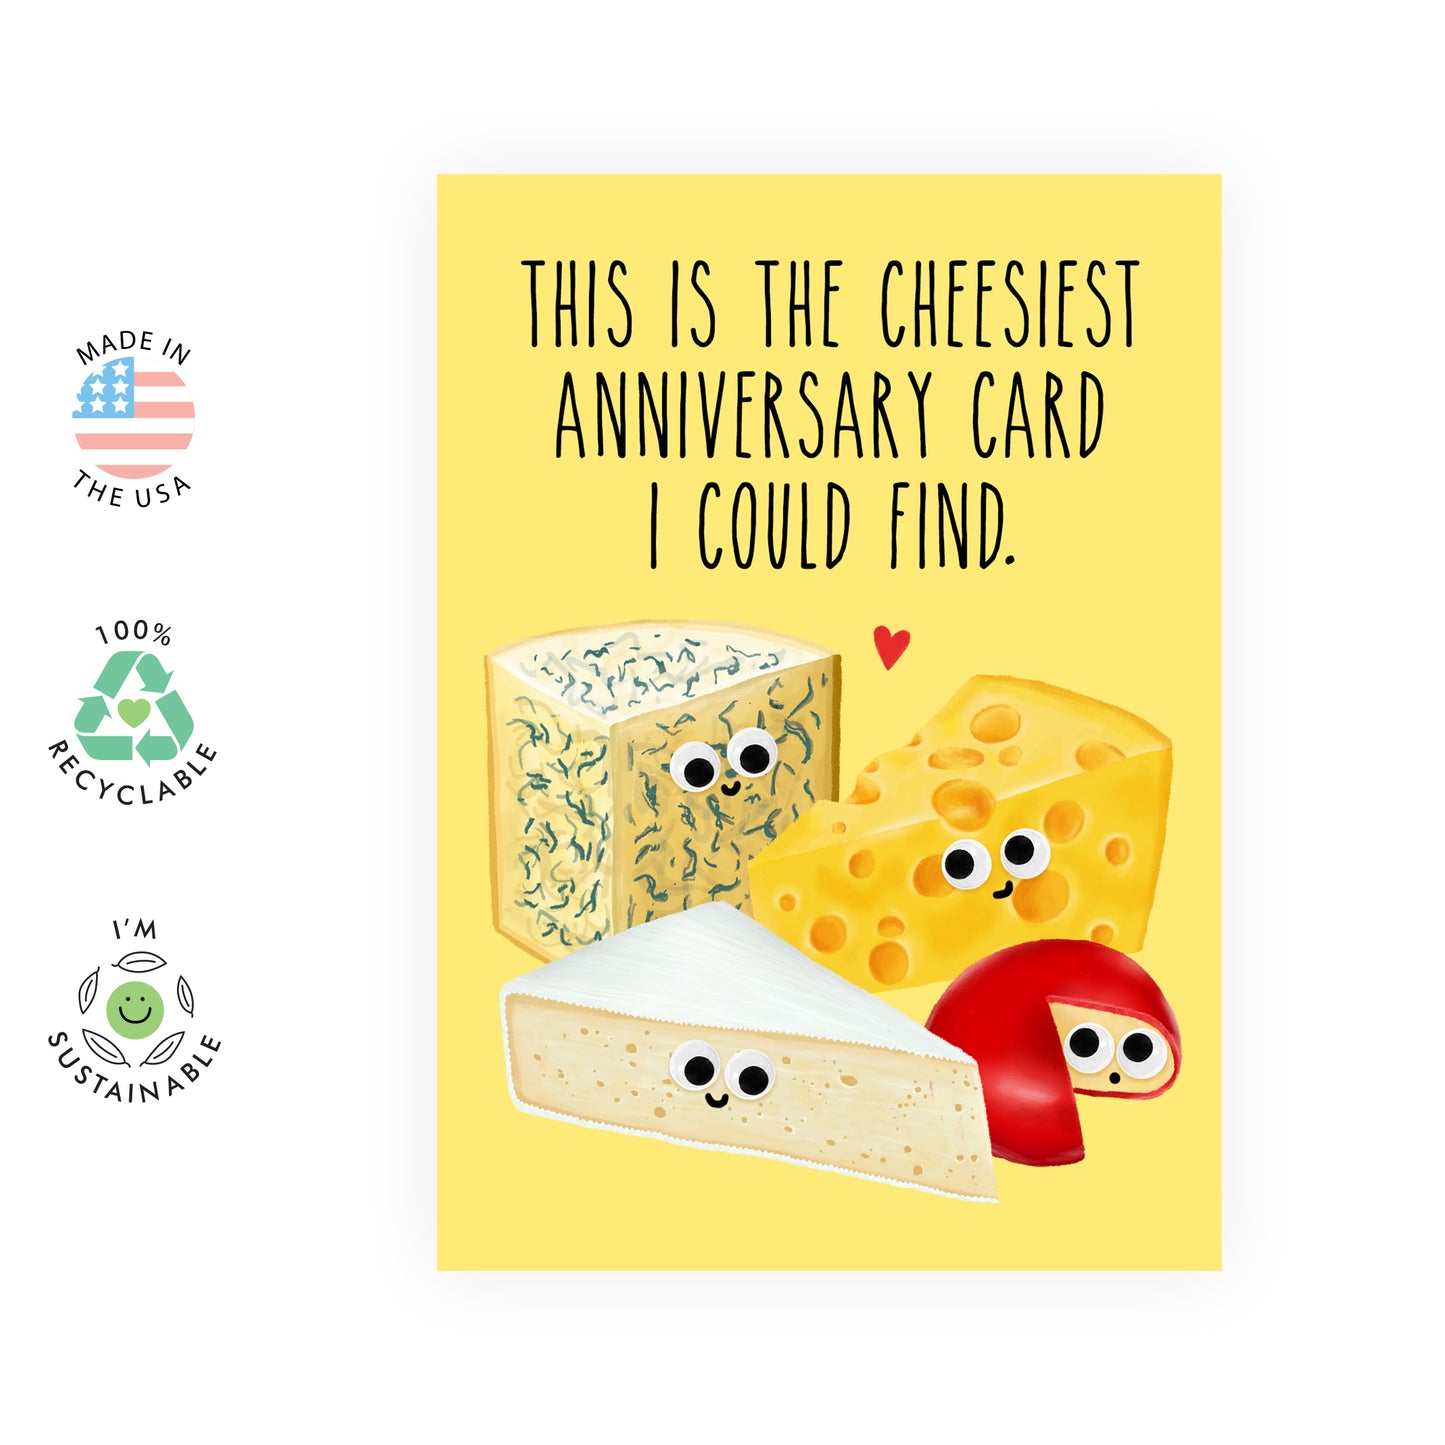 Cute Anniversary Card - Cheesiest Anniversary Card I Could Find - For Men Women Him Her